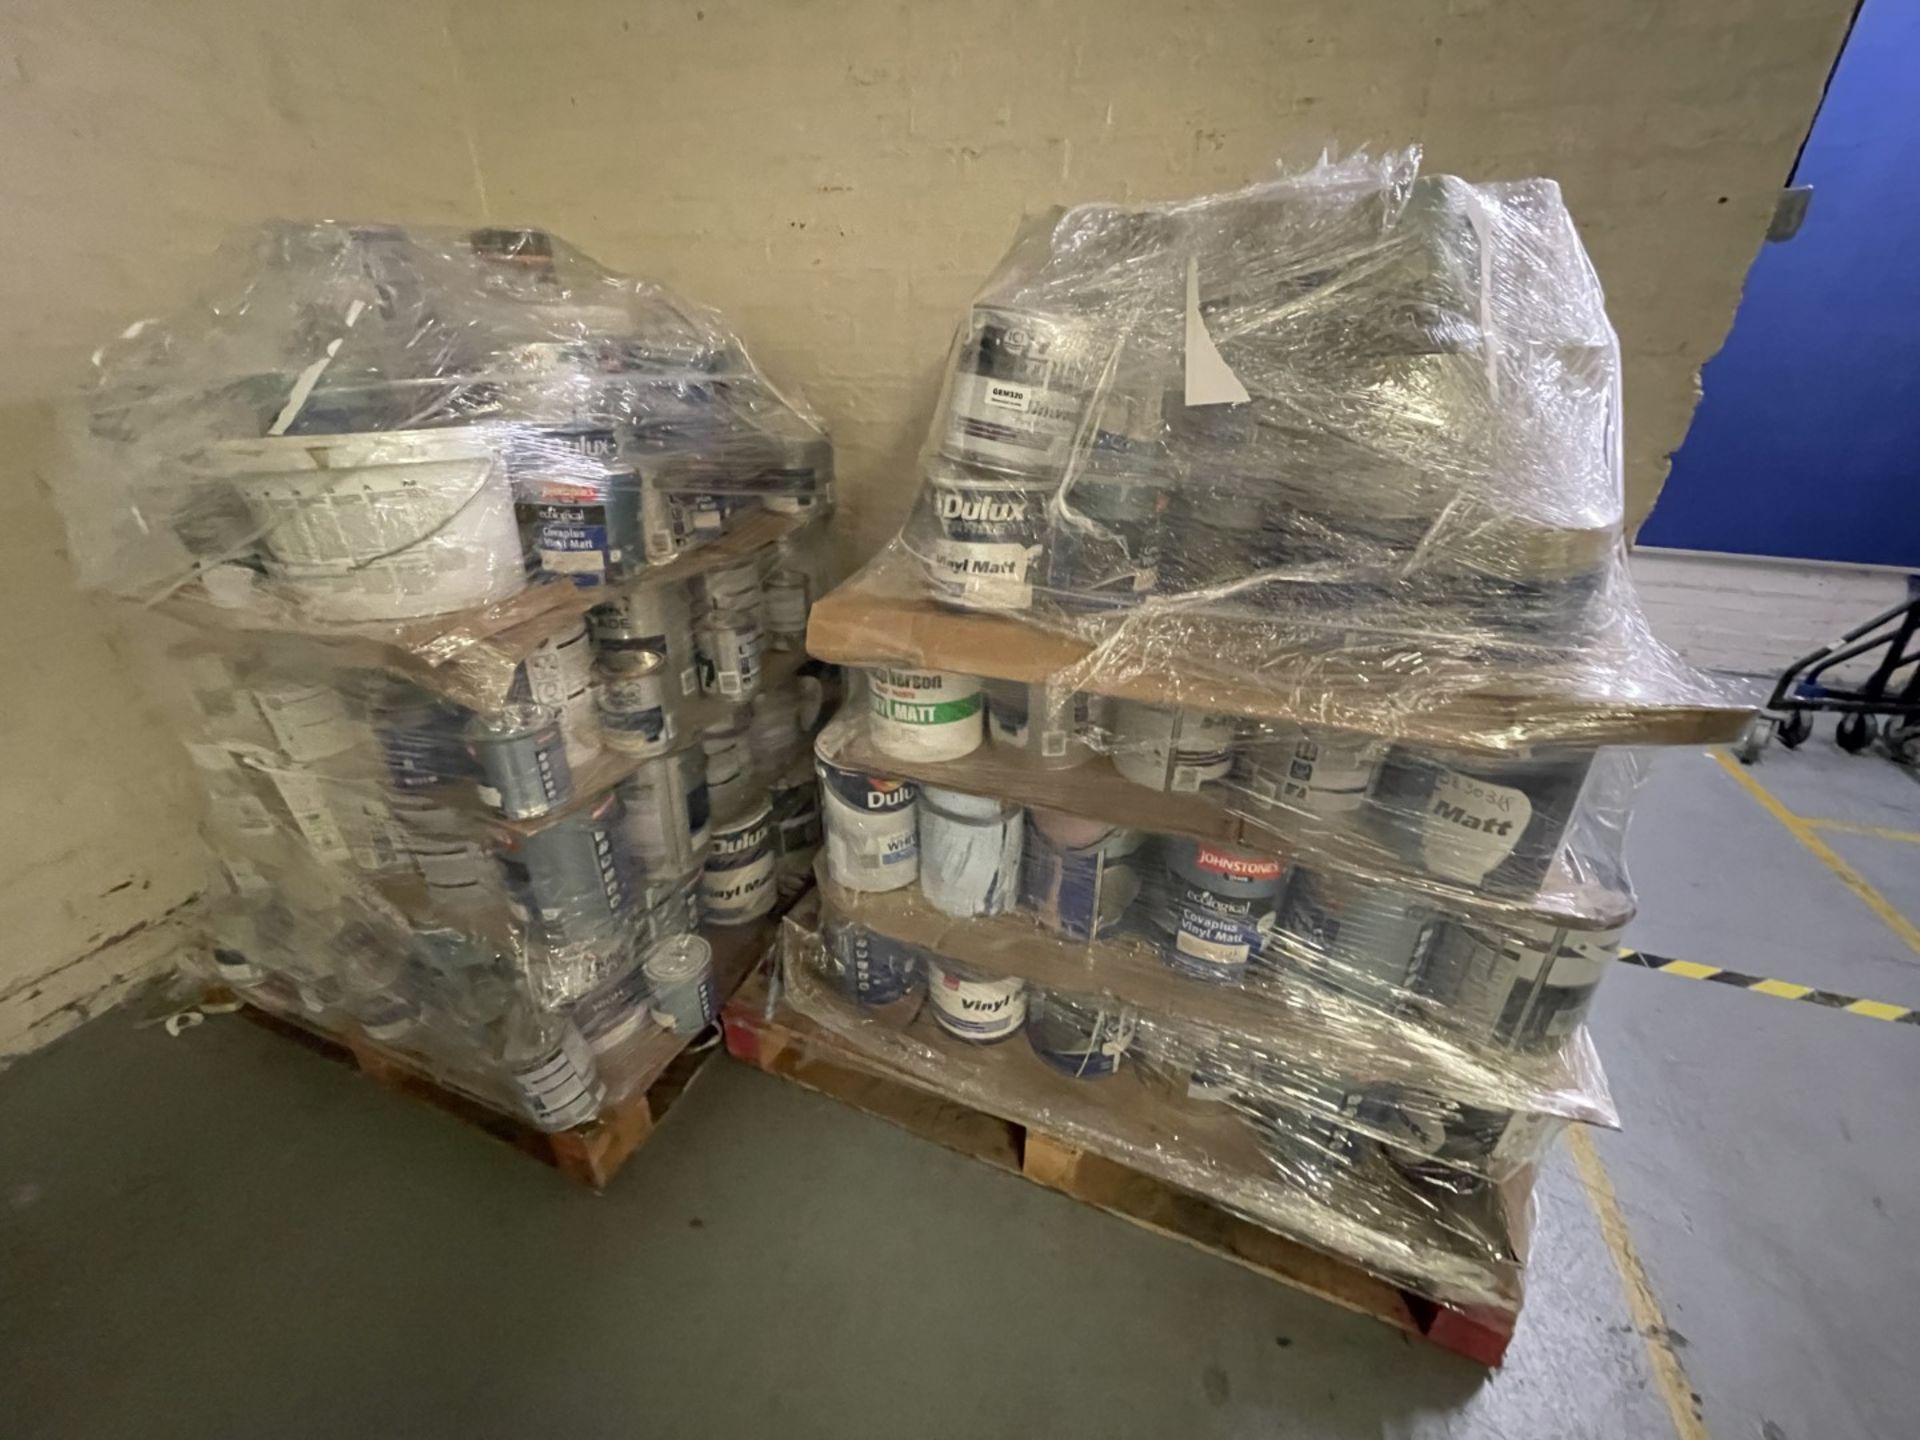 2 x Pallets of Tins of Paint  - Various Brands and Colours Included - CL670 - Ref: GEM320 - - Image 4 of 7